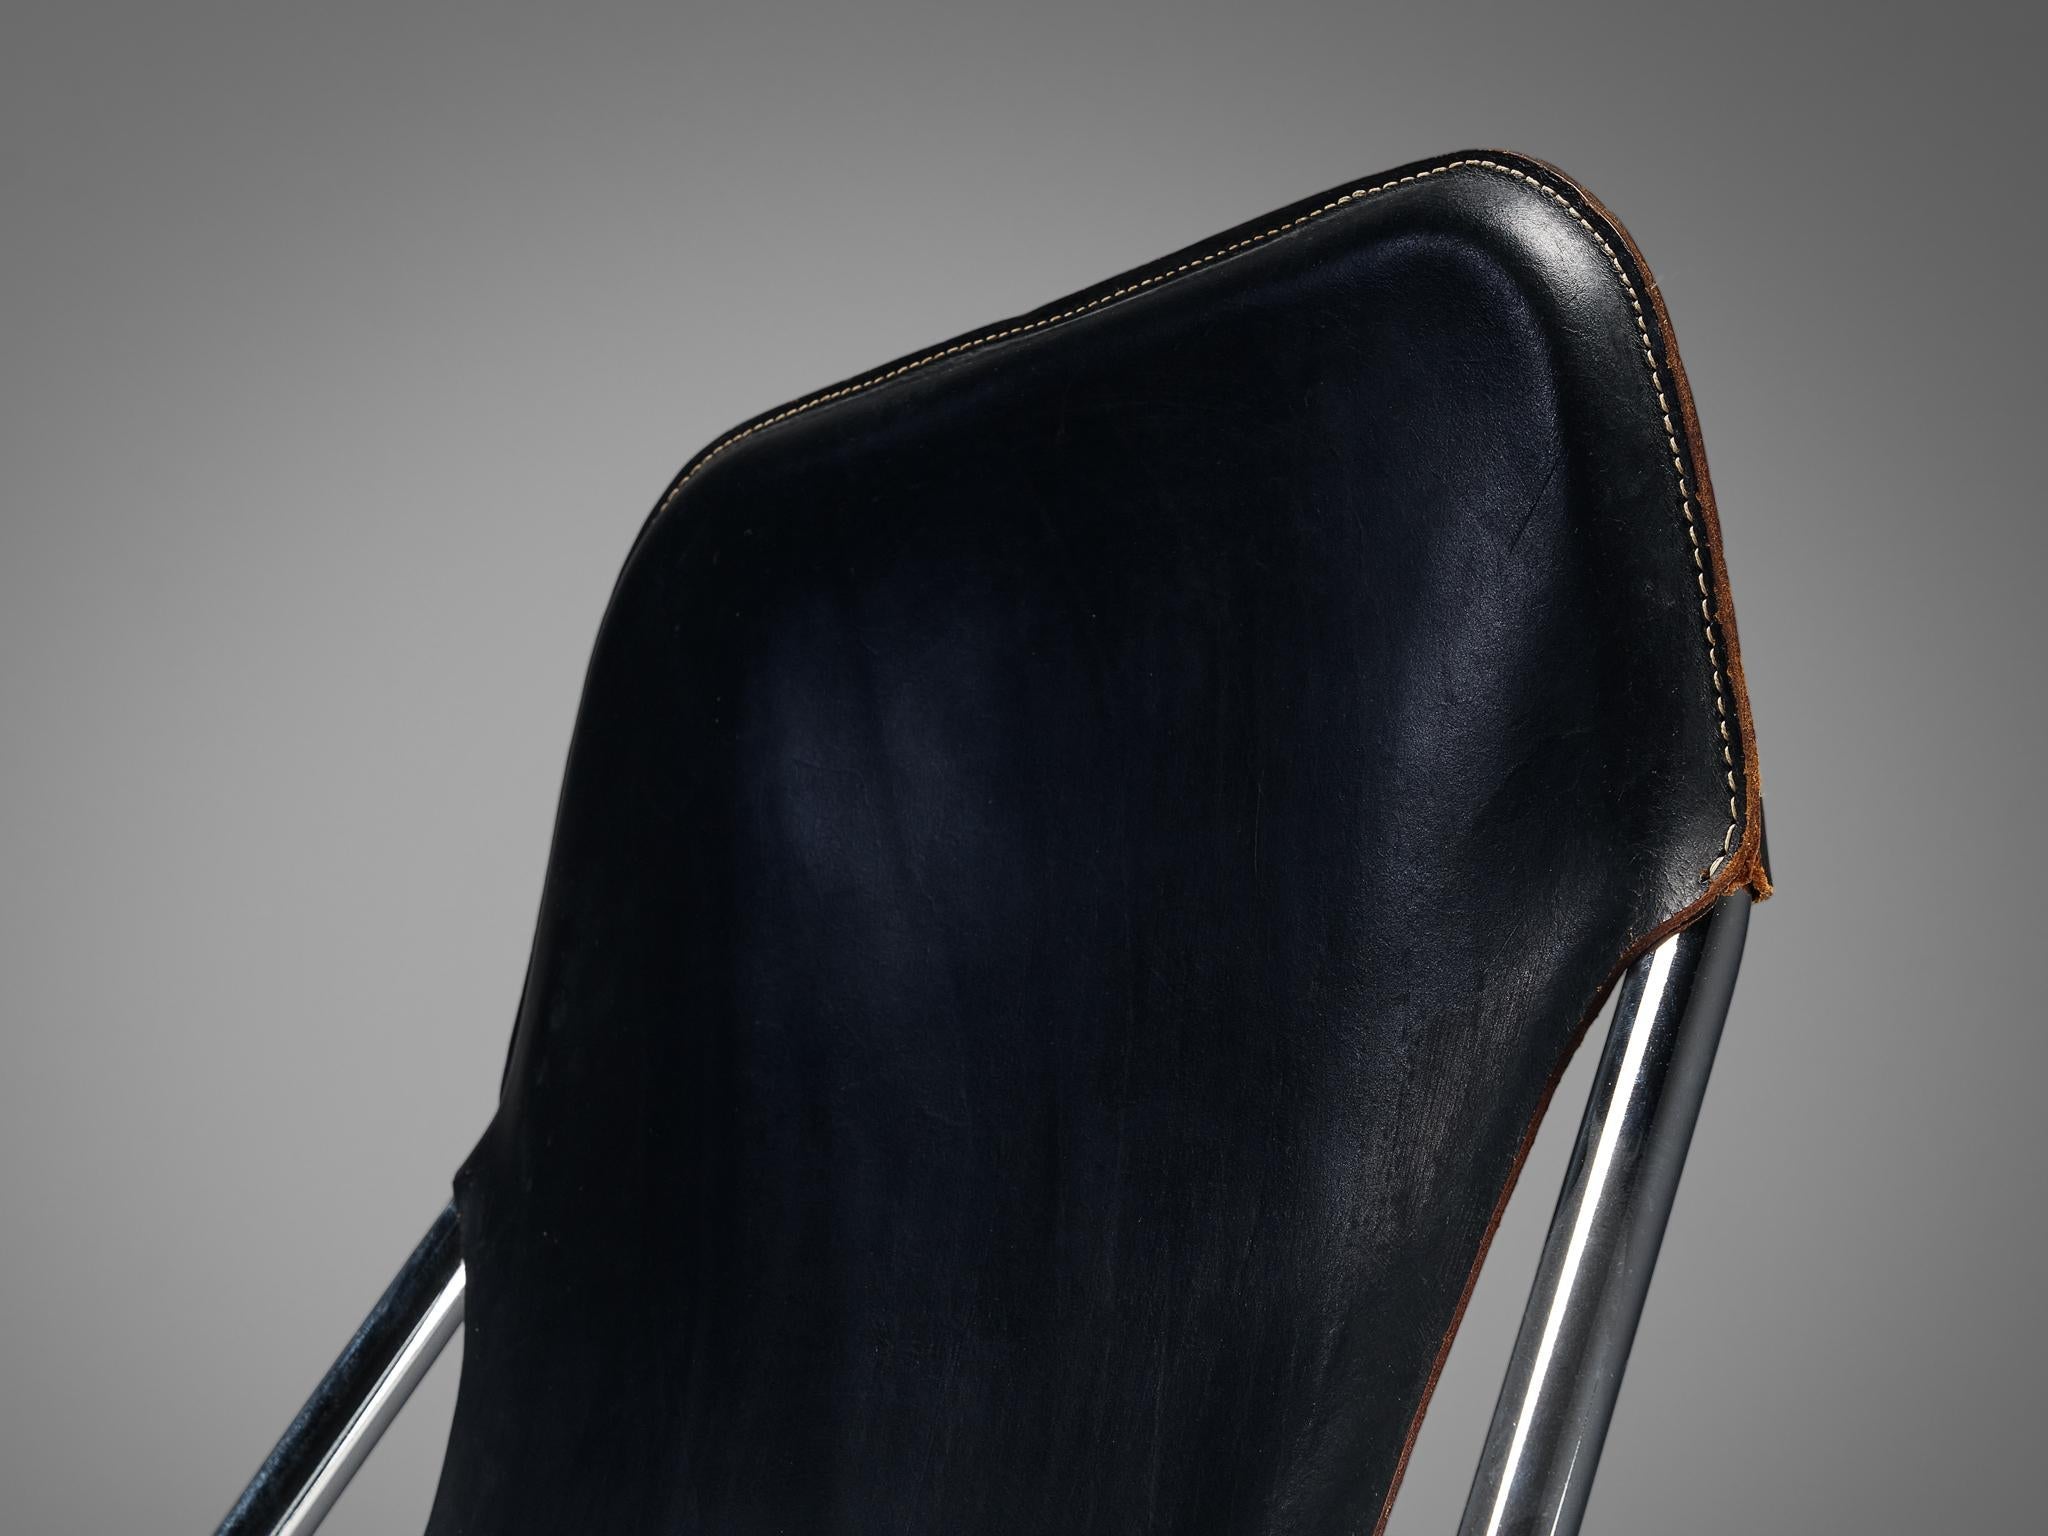 Tubular Lounge Chair and Ottoman in Black Leather